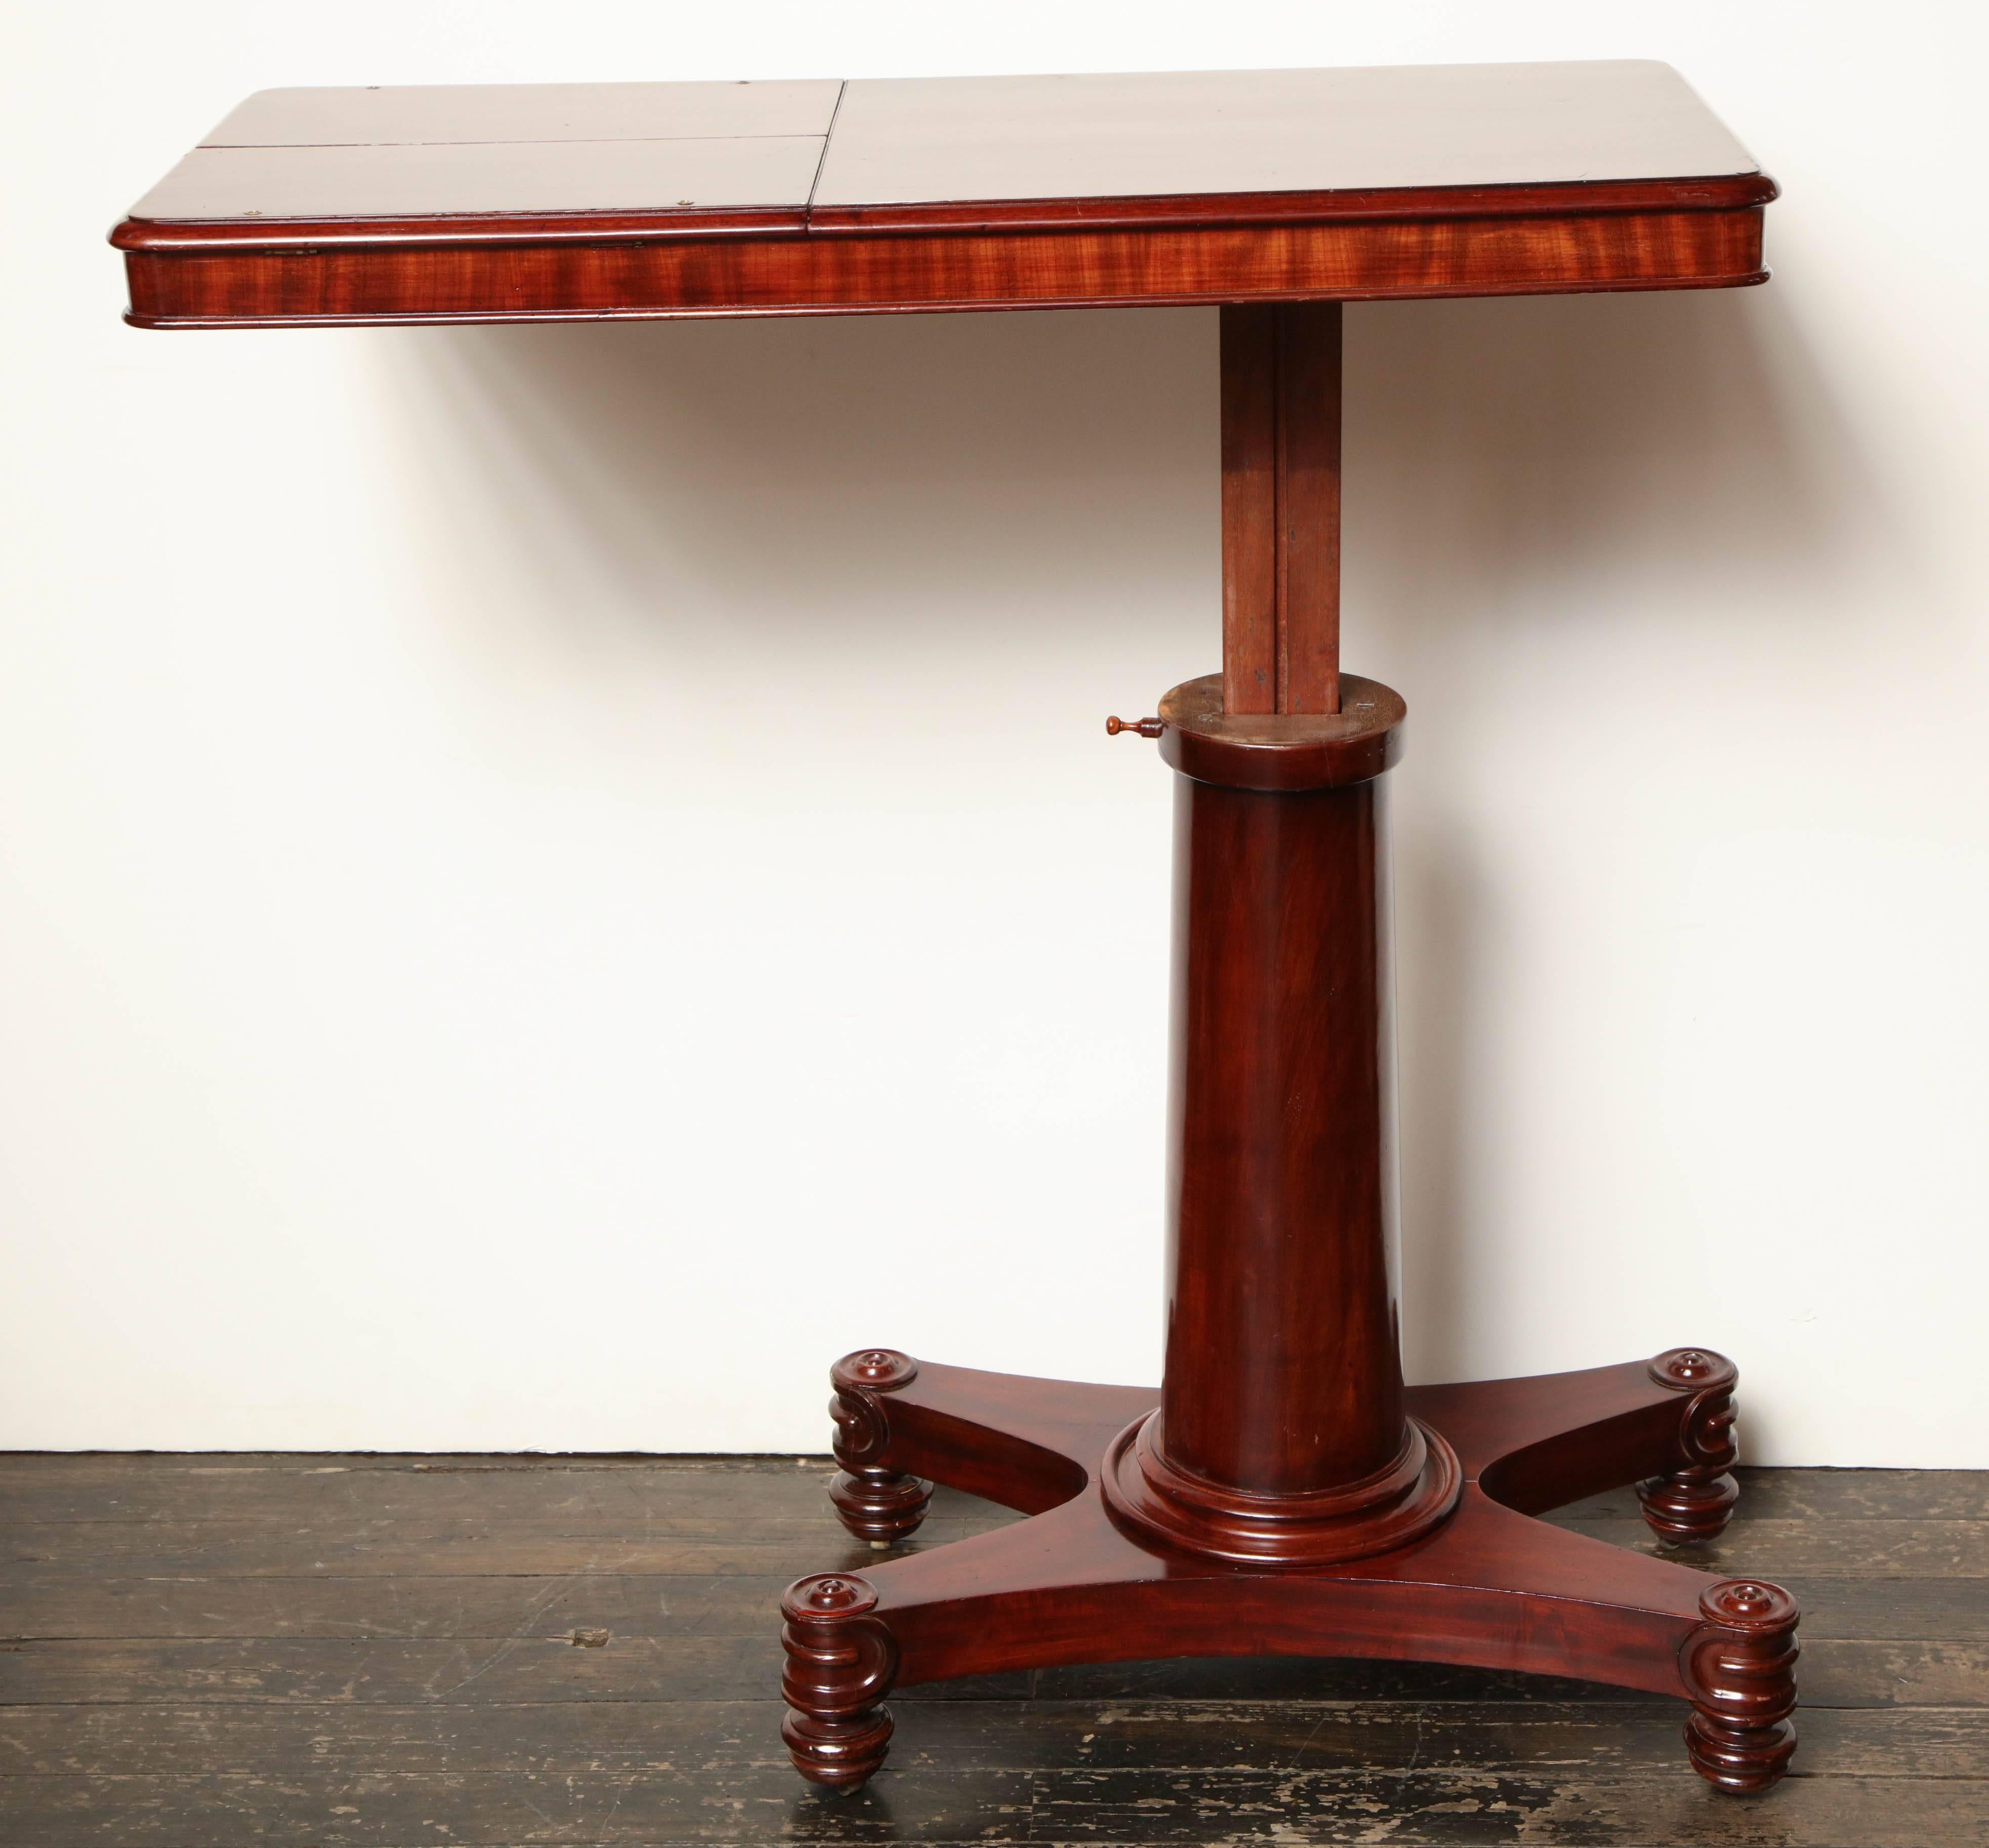 Mahogany Early 19th Century English Articulated Bed Table